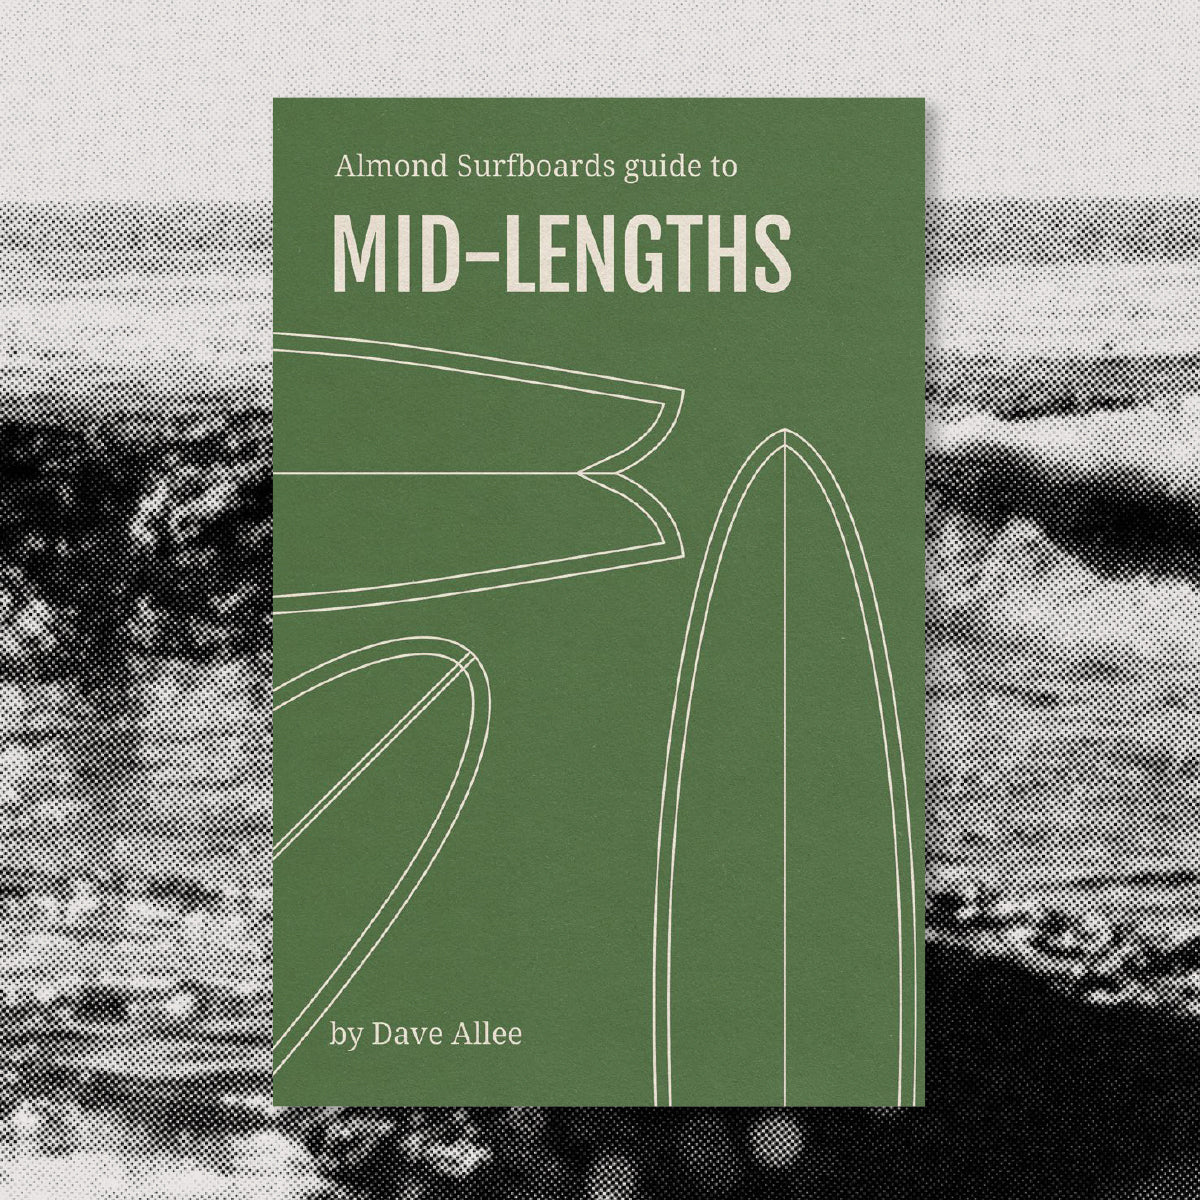 Almond's Guide to Mid-Lengths